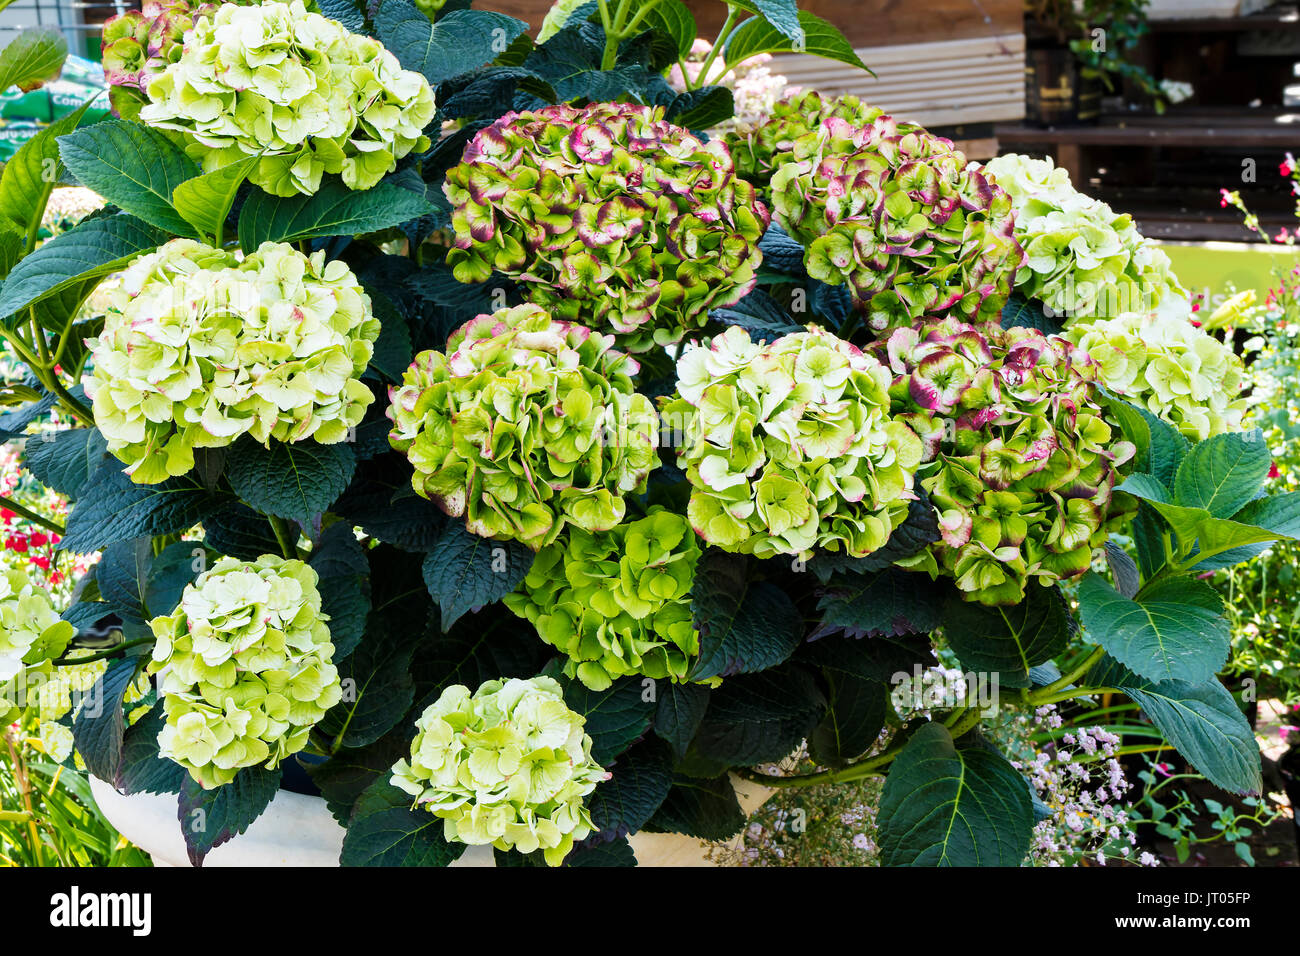 Hydrangea macrophylla with intricate pistachio green and purple flowers. Stock Photo